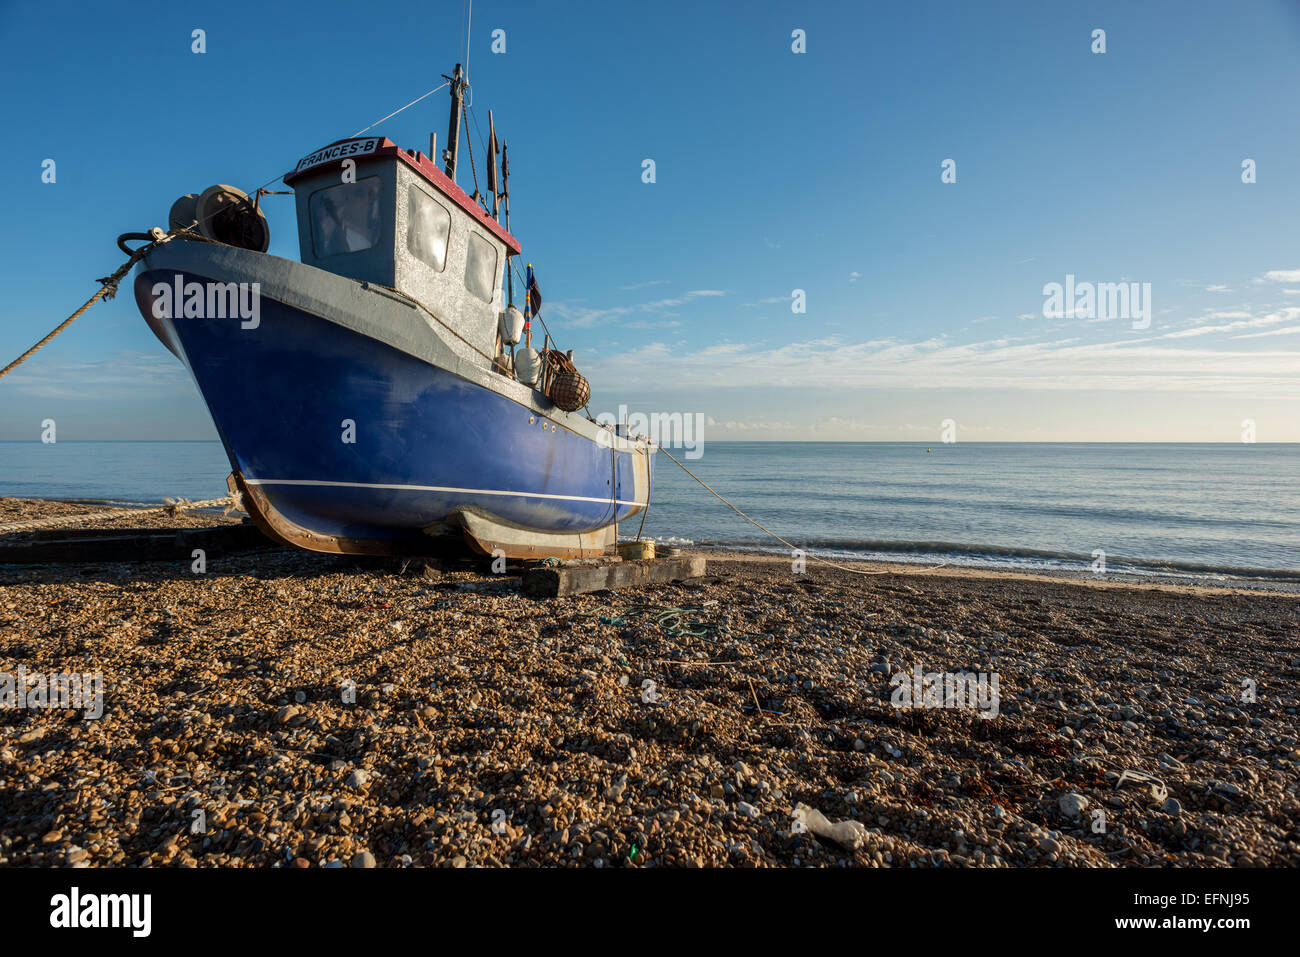 Fishing boat on the beach at Hythe, Kent. Stock Photo